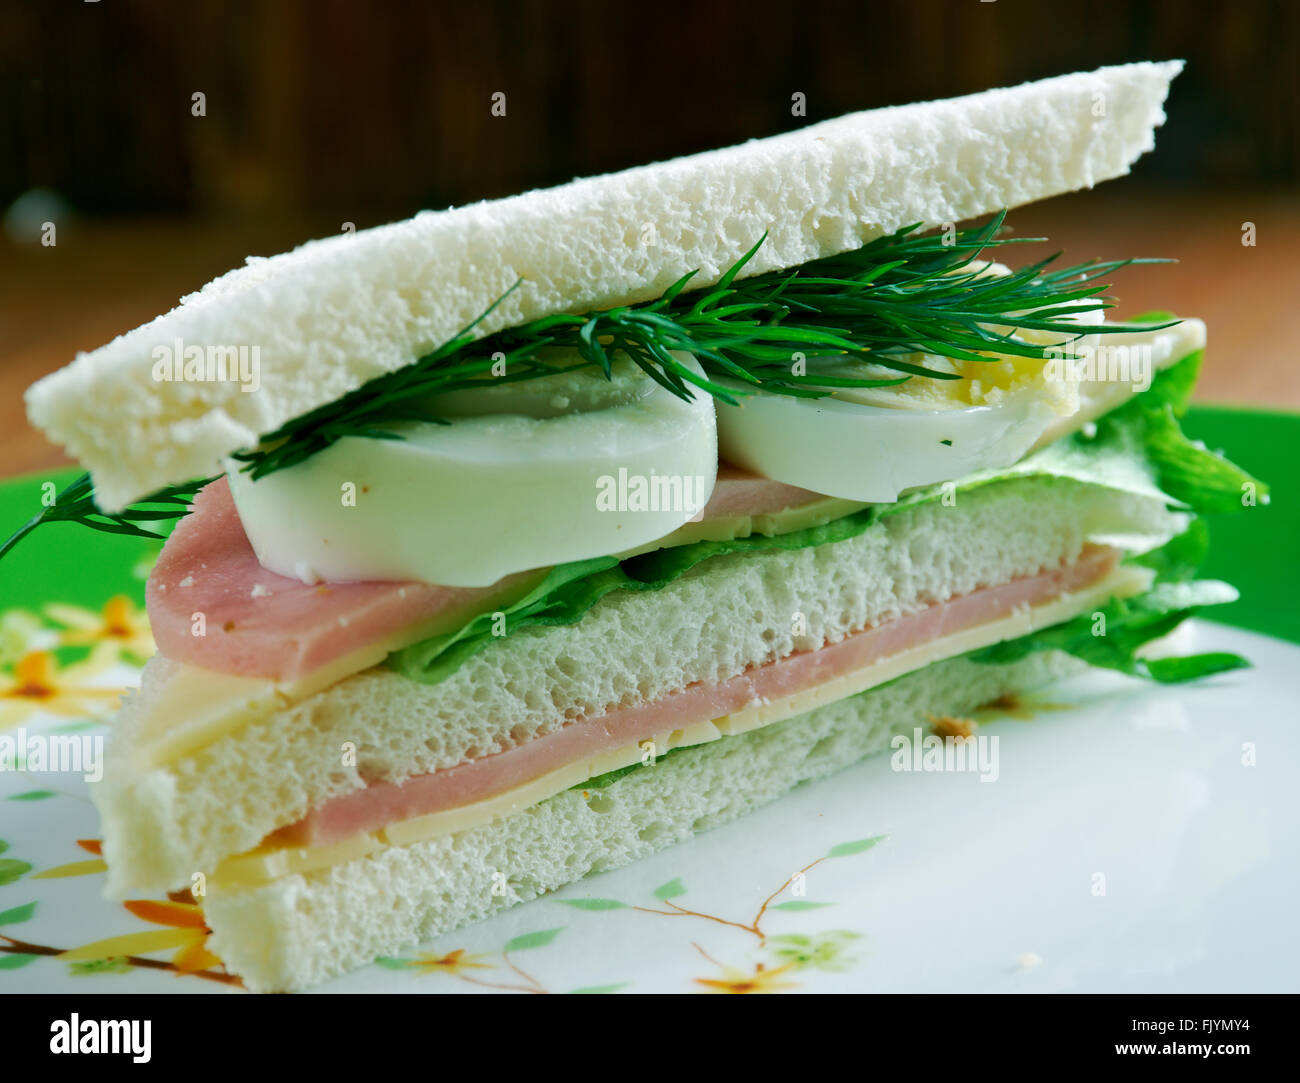 rand Oswald Voornaamwoord Tramezzino triangular sandwich constructed from two slices of soft white  bread with the crusts.Italian cuisine Stock Photo - Alamy